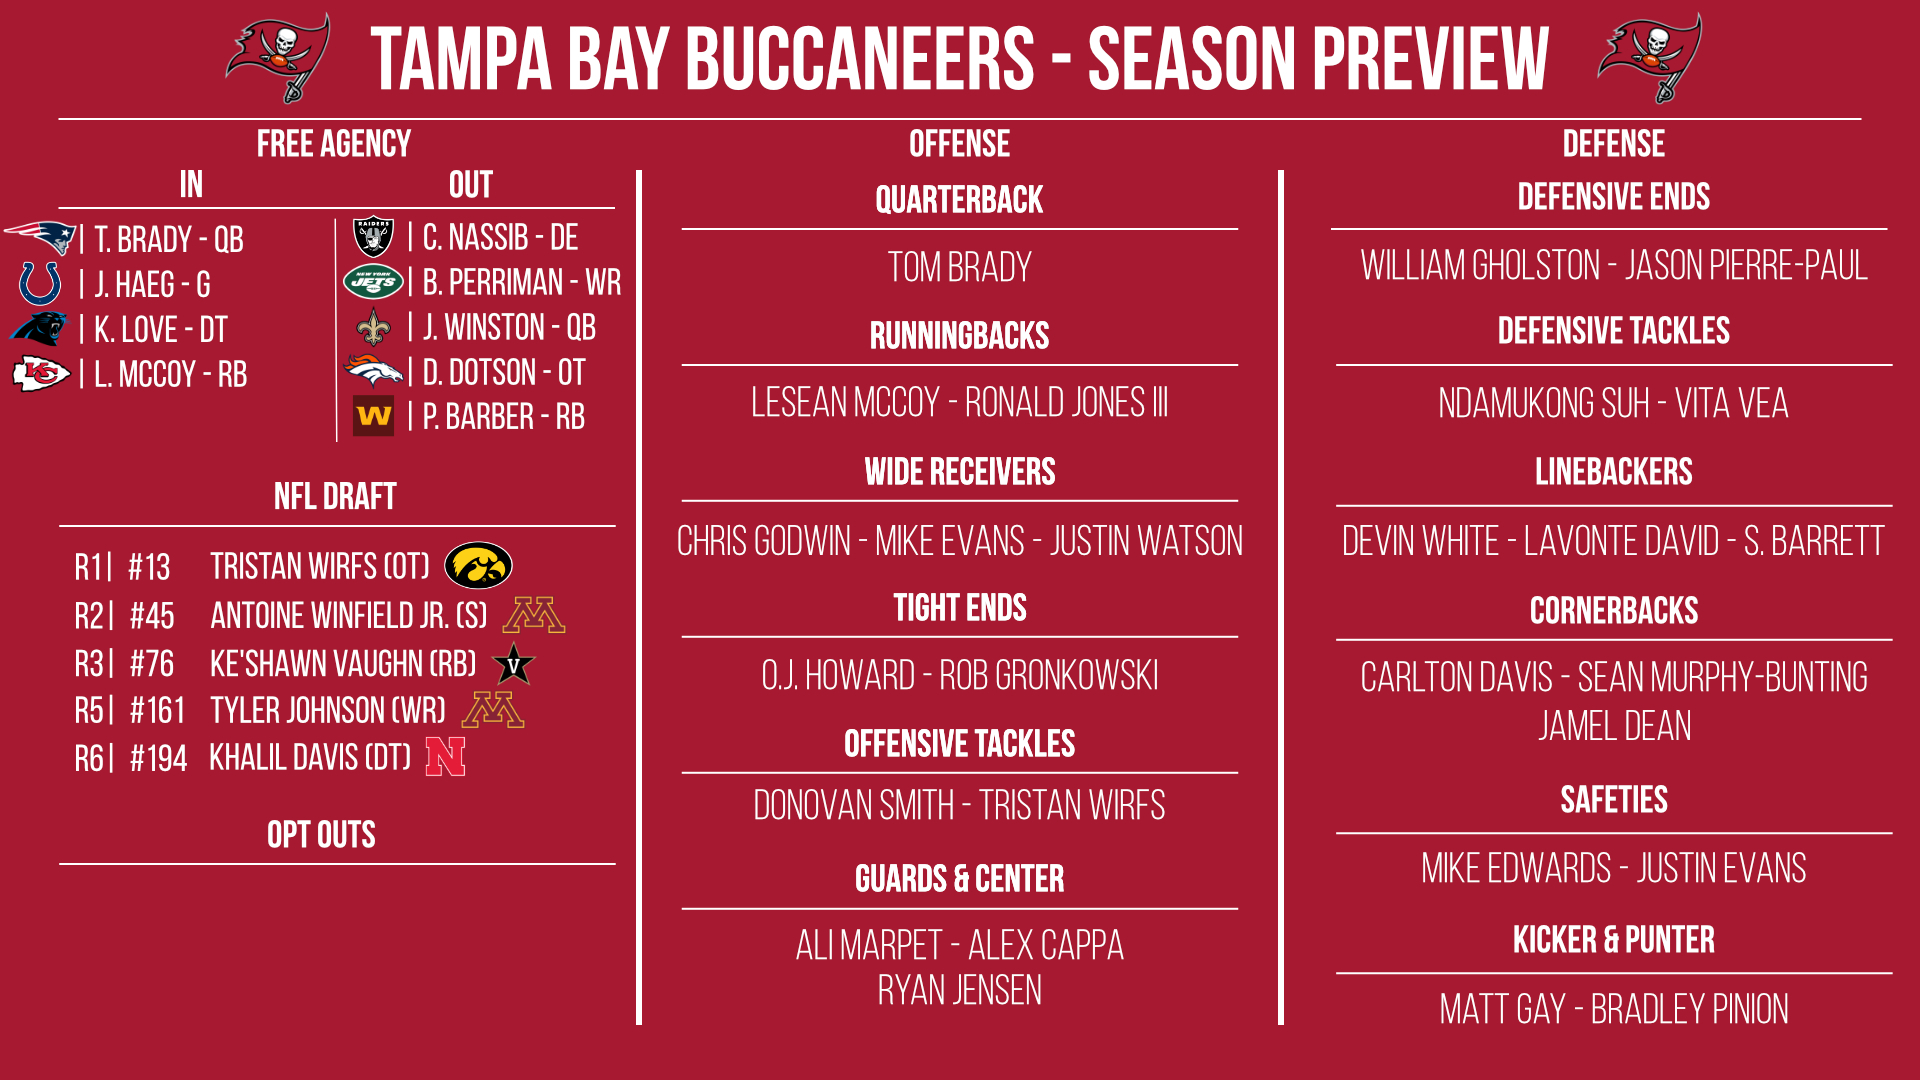 Tampa Bay Buccaneers preview